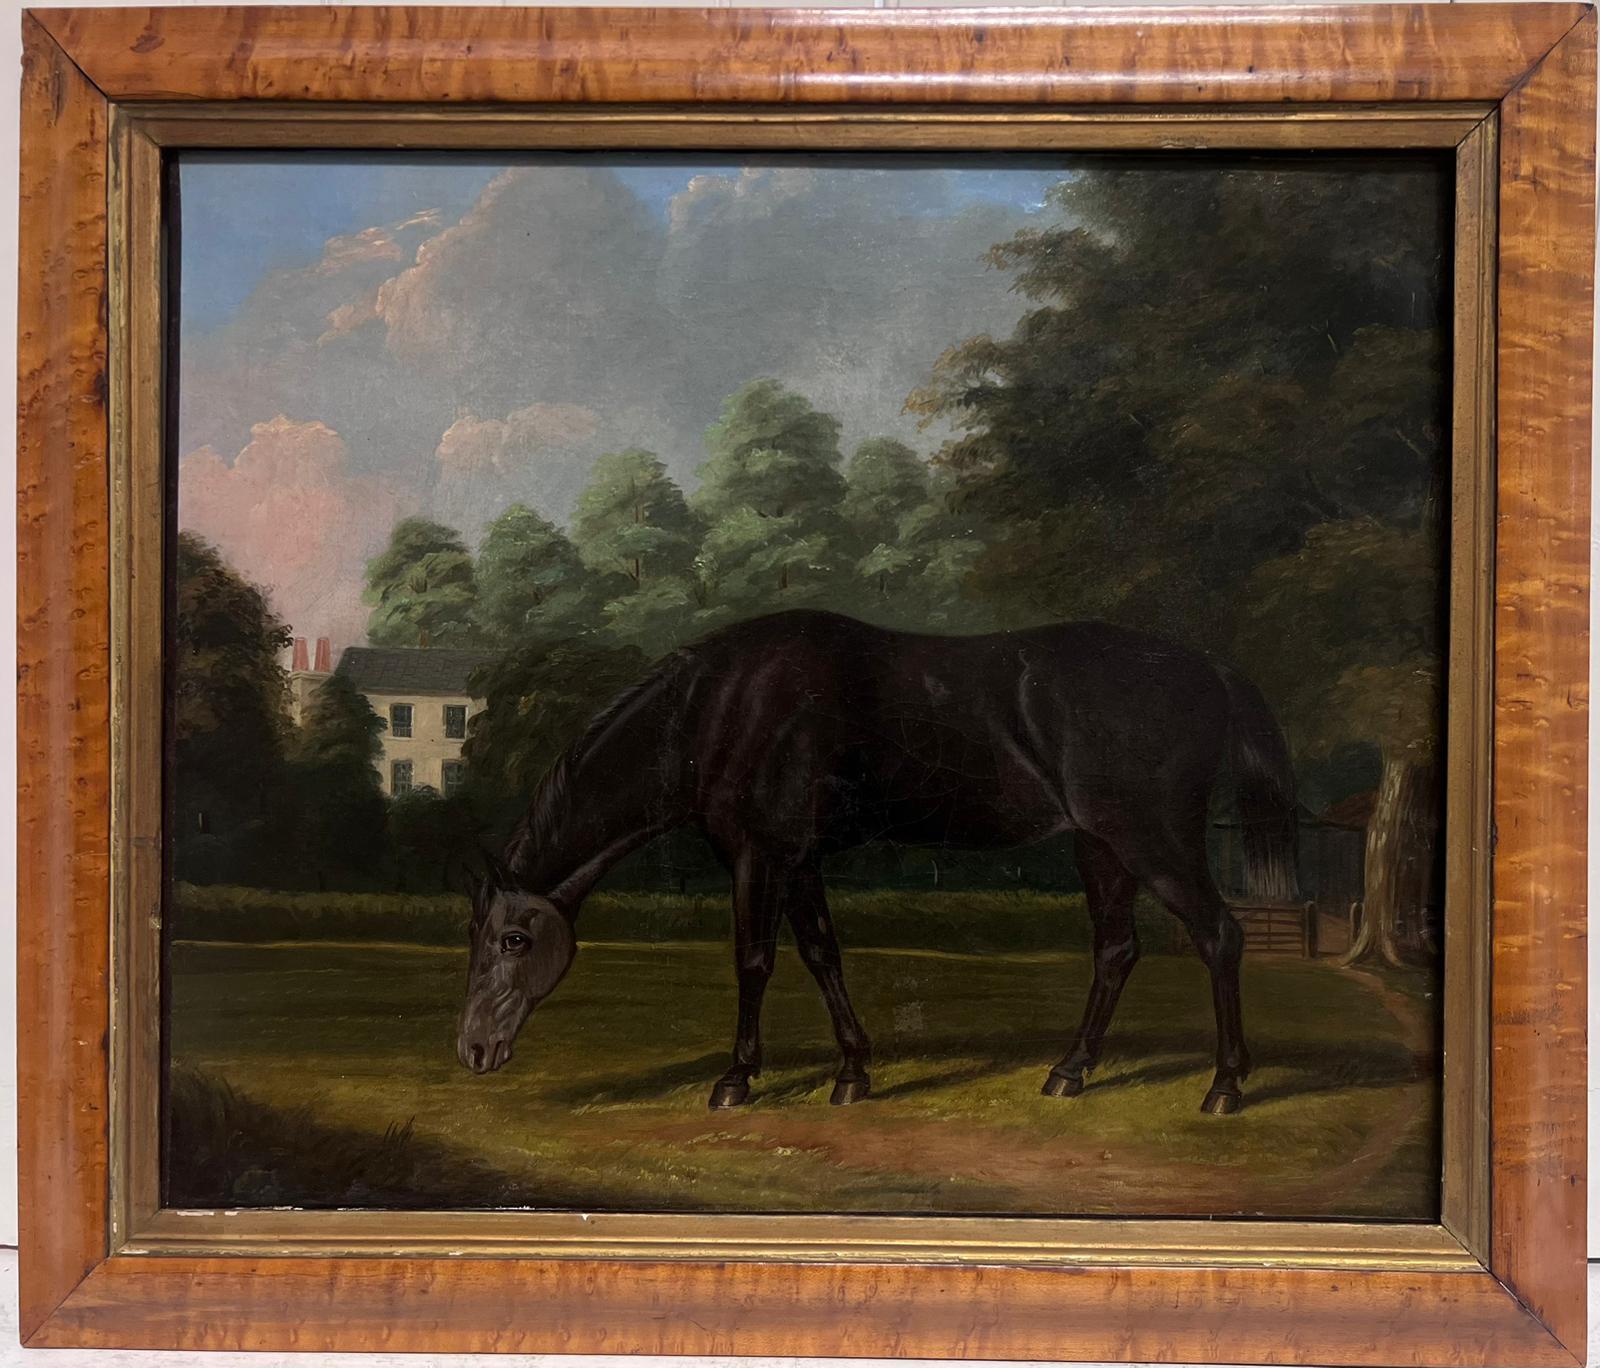 French Equestrian 19th century Landscape Painting - Antique French Oil Painting Horse in Country House Garden / Maple Wood Frame